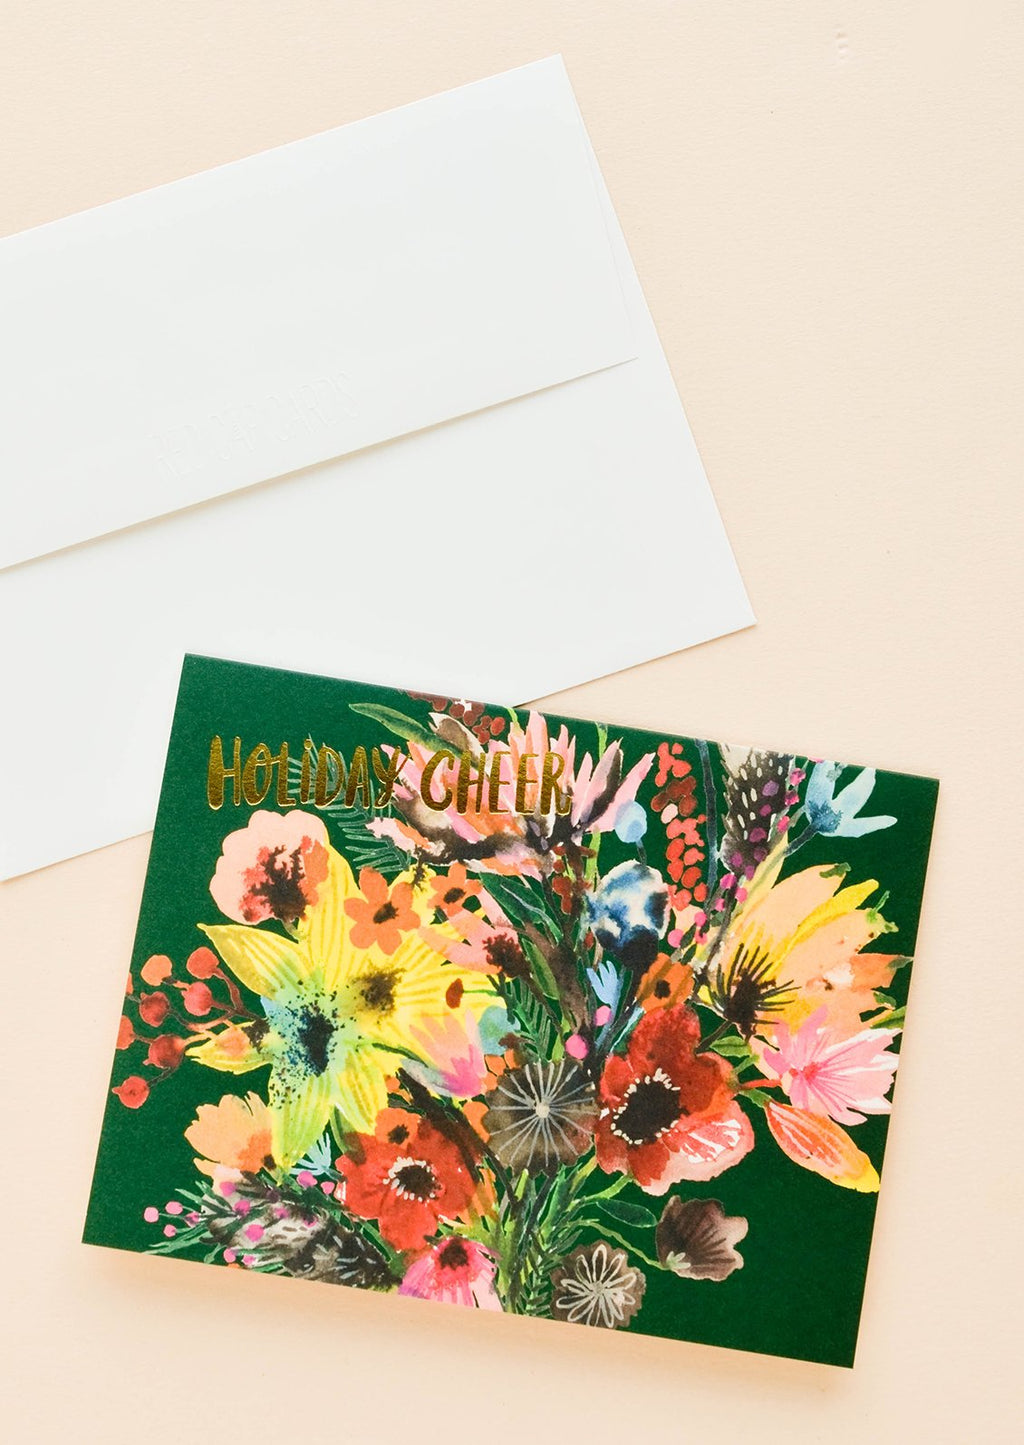 1: Greeting card with elaborate, colorful floral bouquet with "Holiday cheer" printed in gold letters. Shown with white envelope.